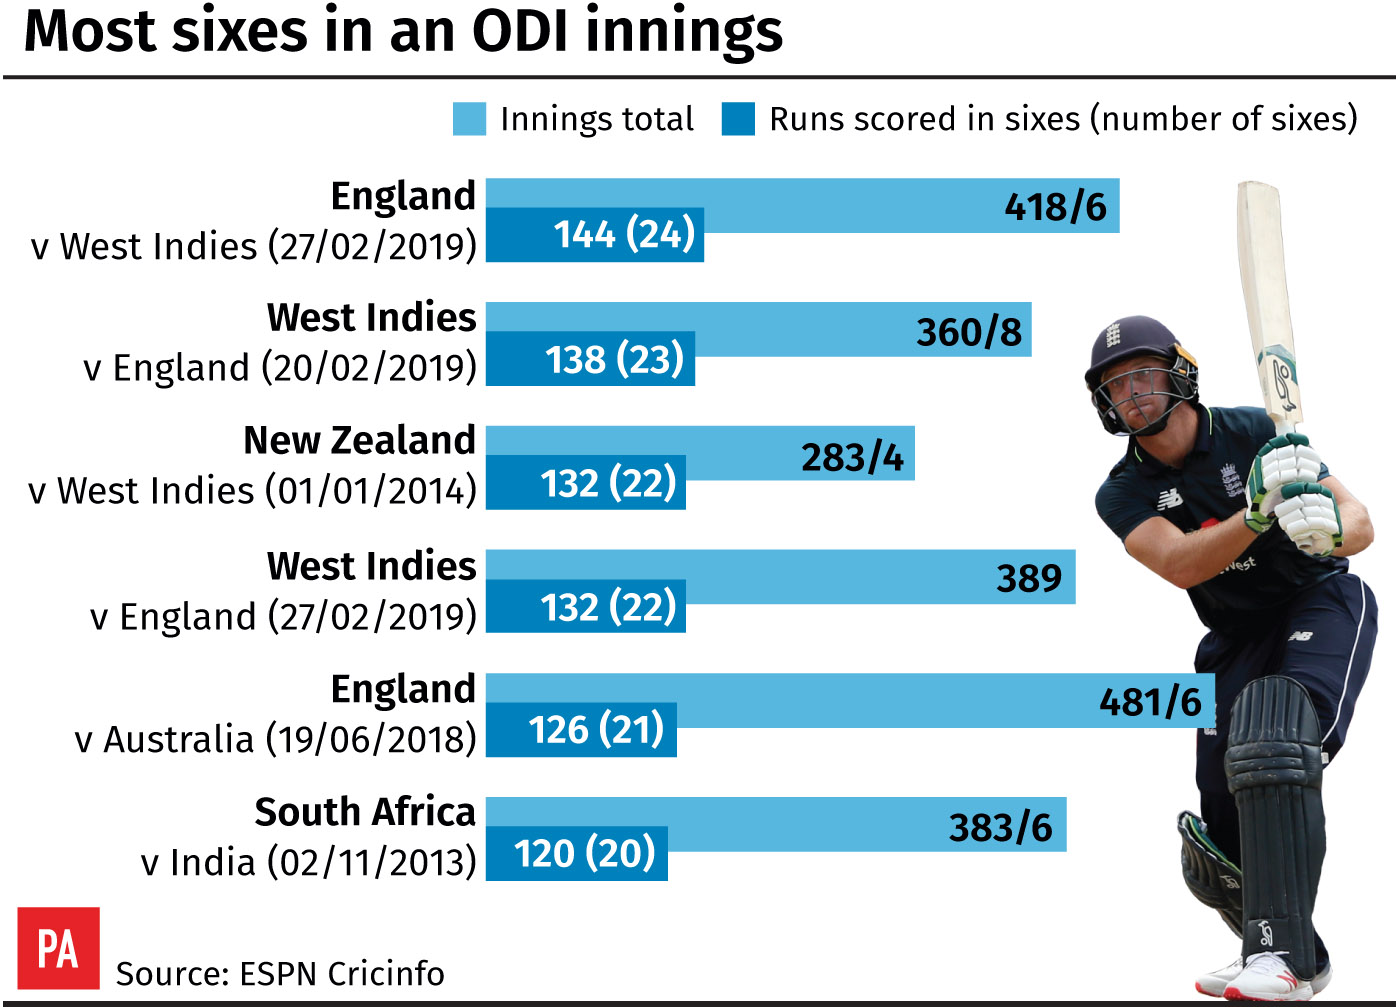 Most sixes in an ODI innings